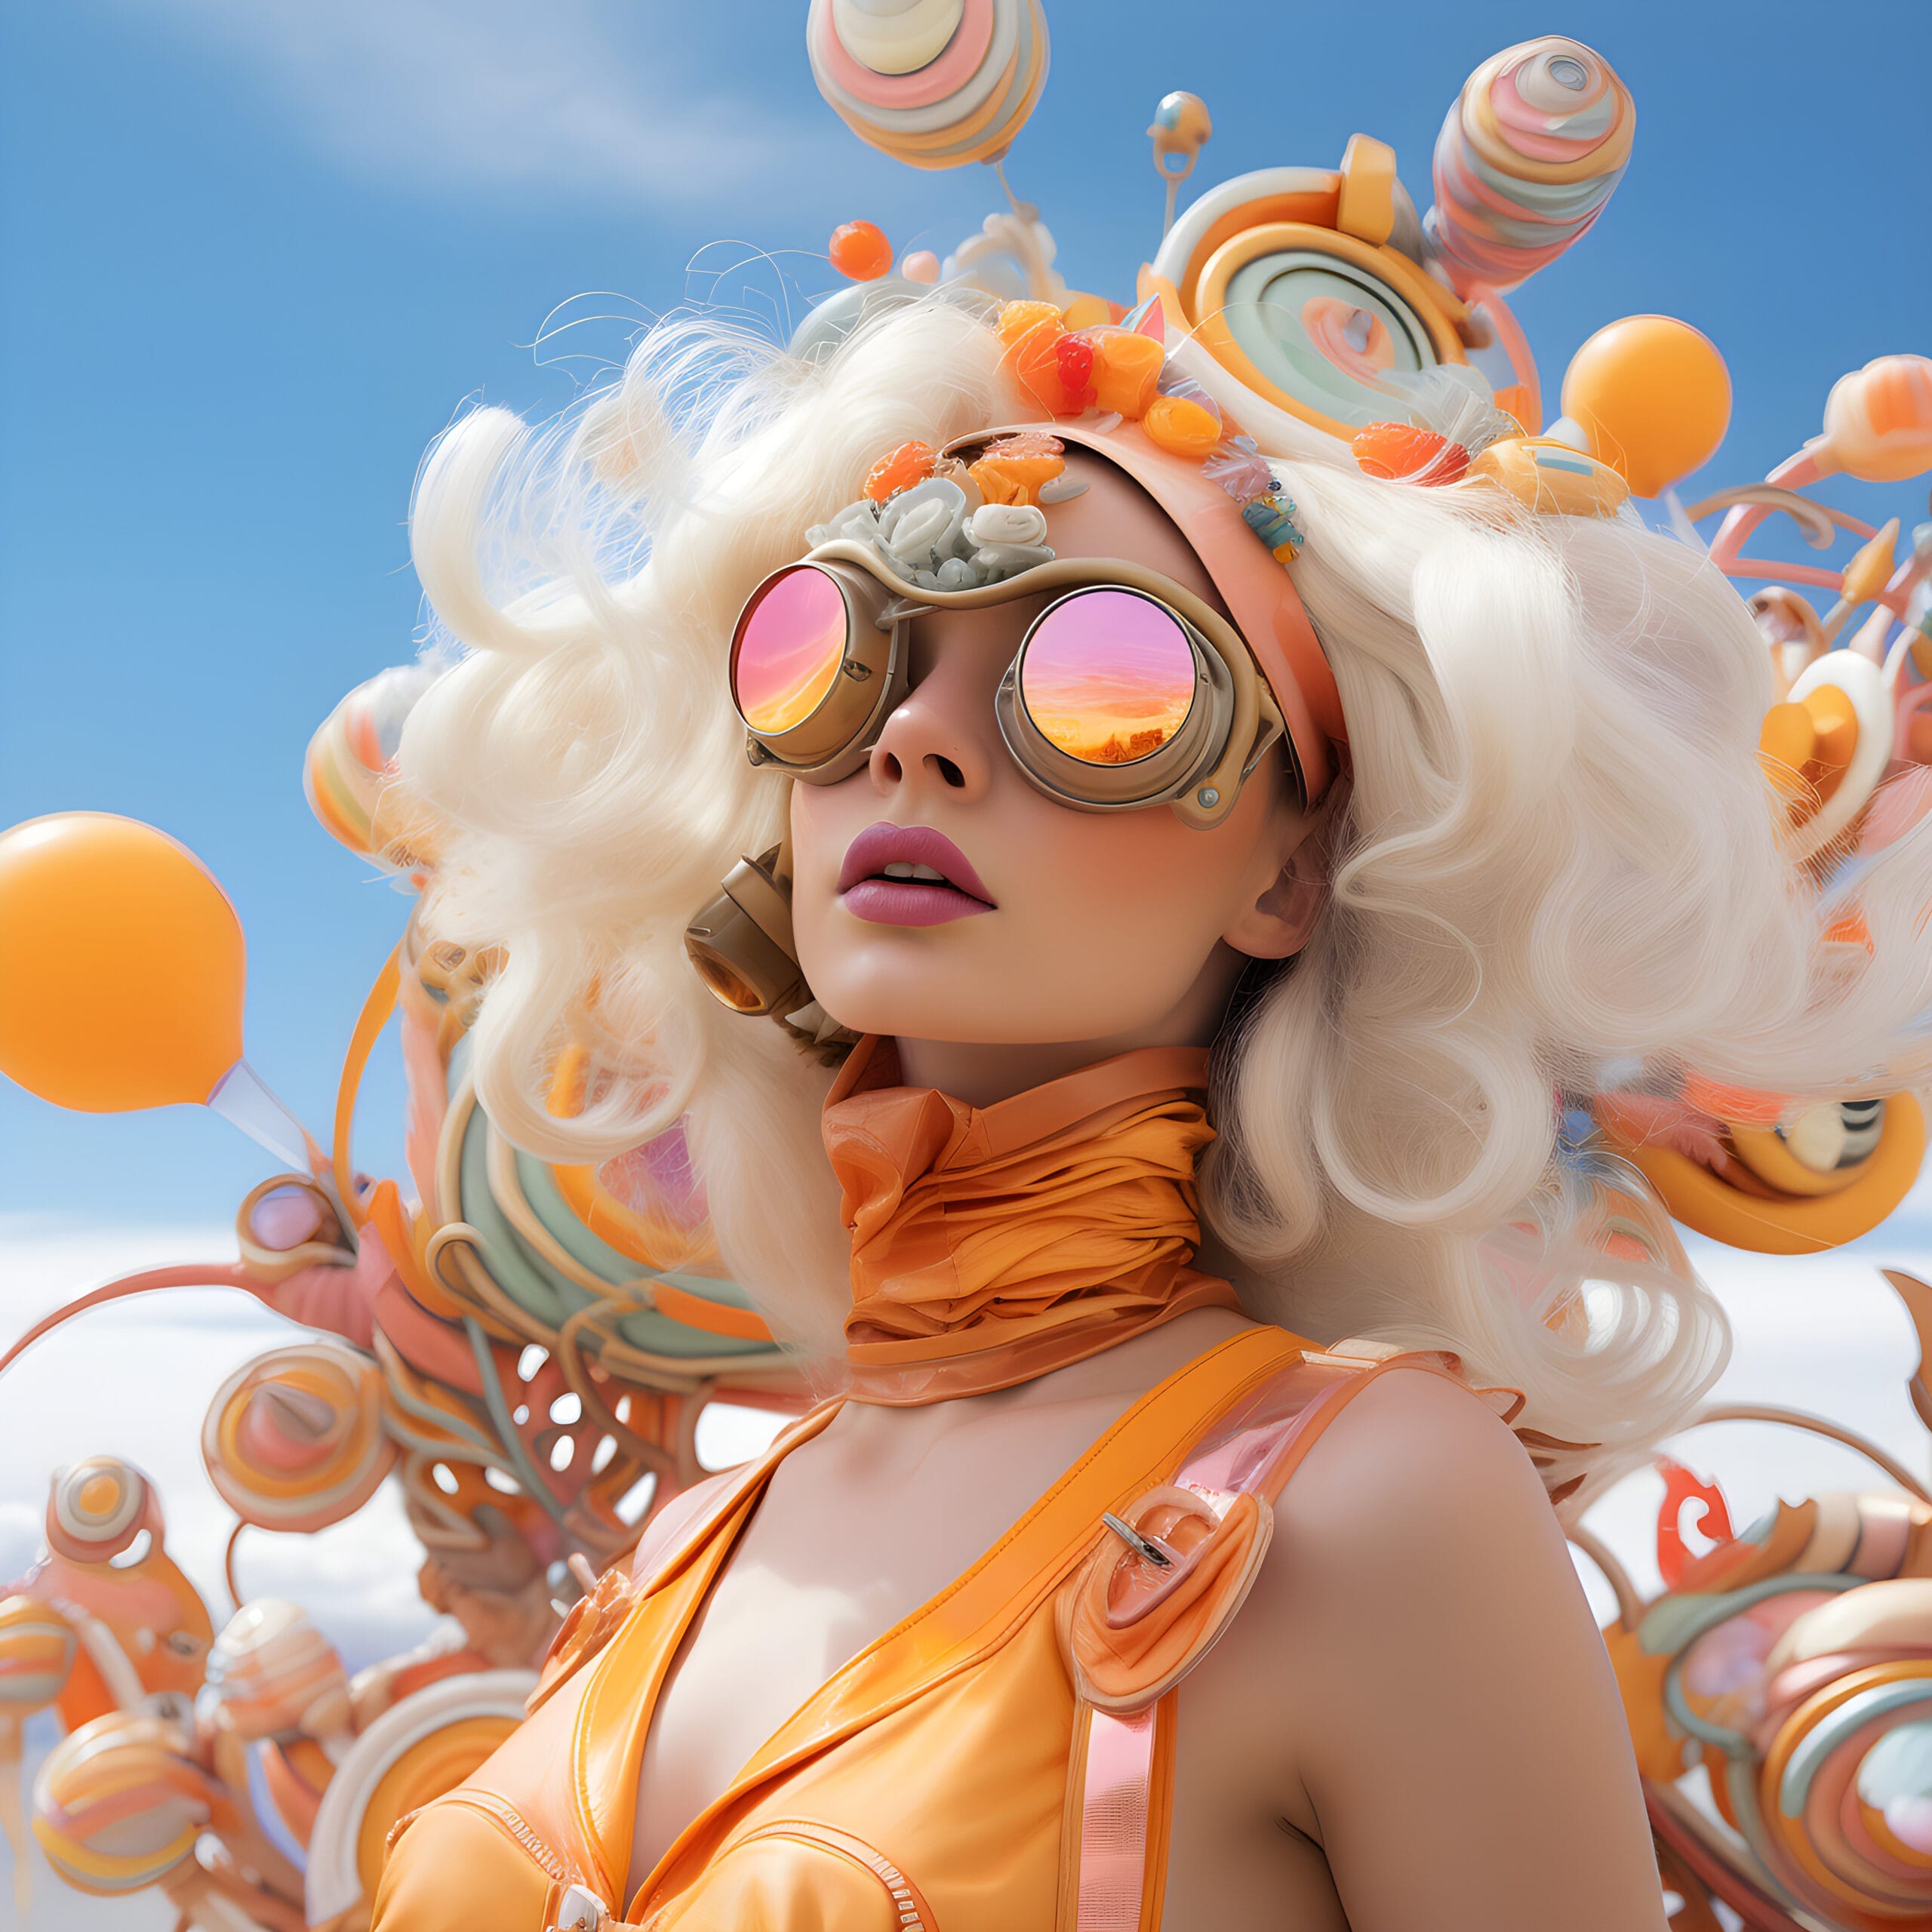 A woman with long blonde hair and glasses is surrounded by balloons in her home.